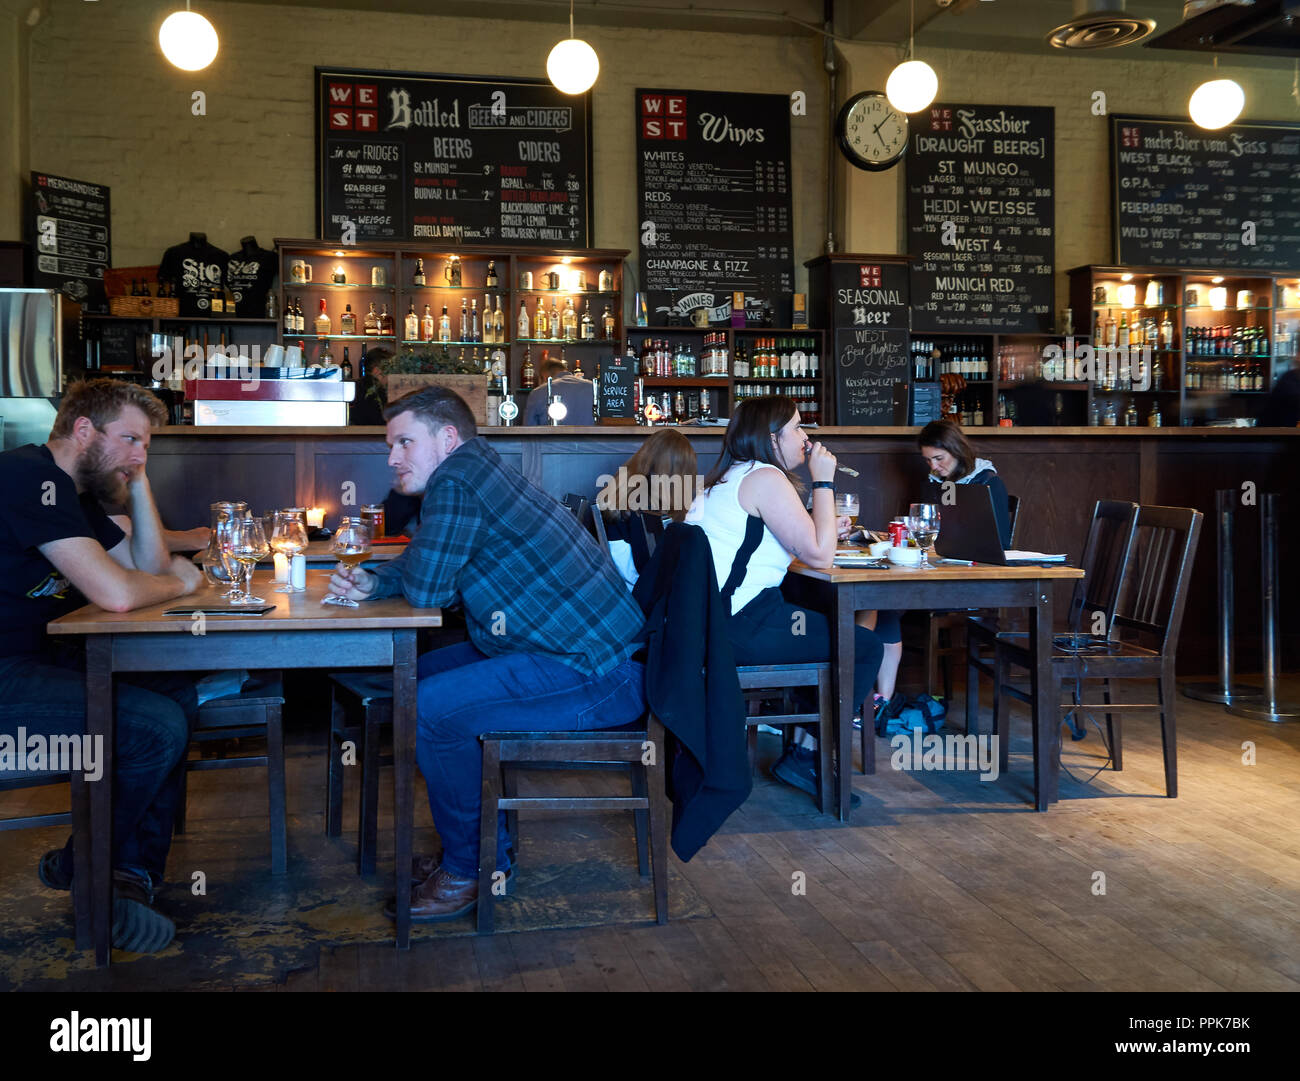 People enjoy a drink inside the popular restaurant and brewery in Glasgow called WEST on the green. Stock Photo